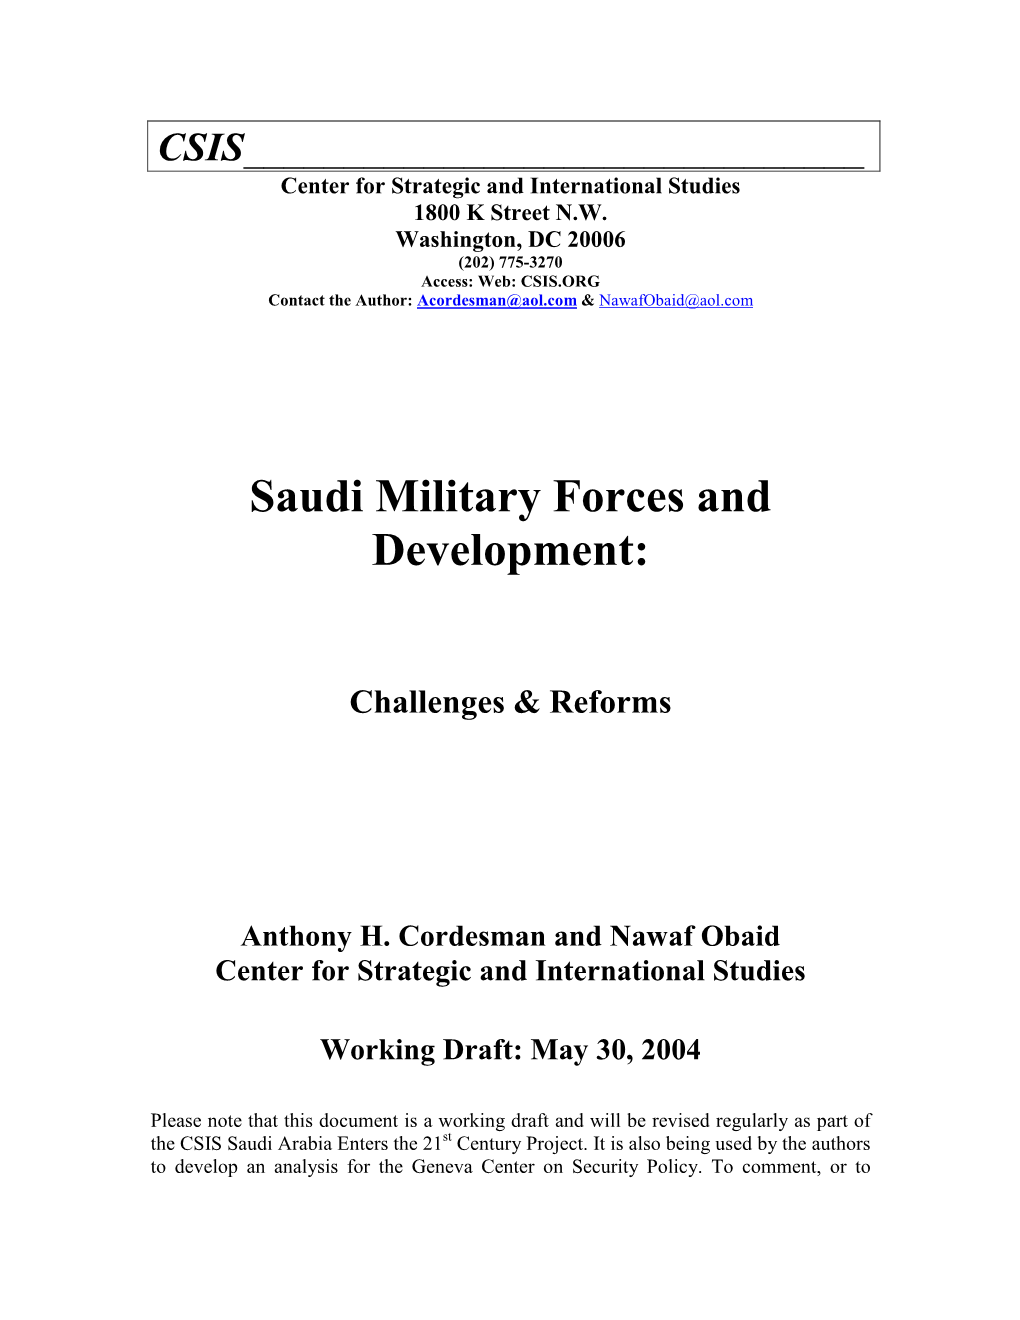 Saudi Military Forces and Development: Challenges & Reforms